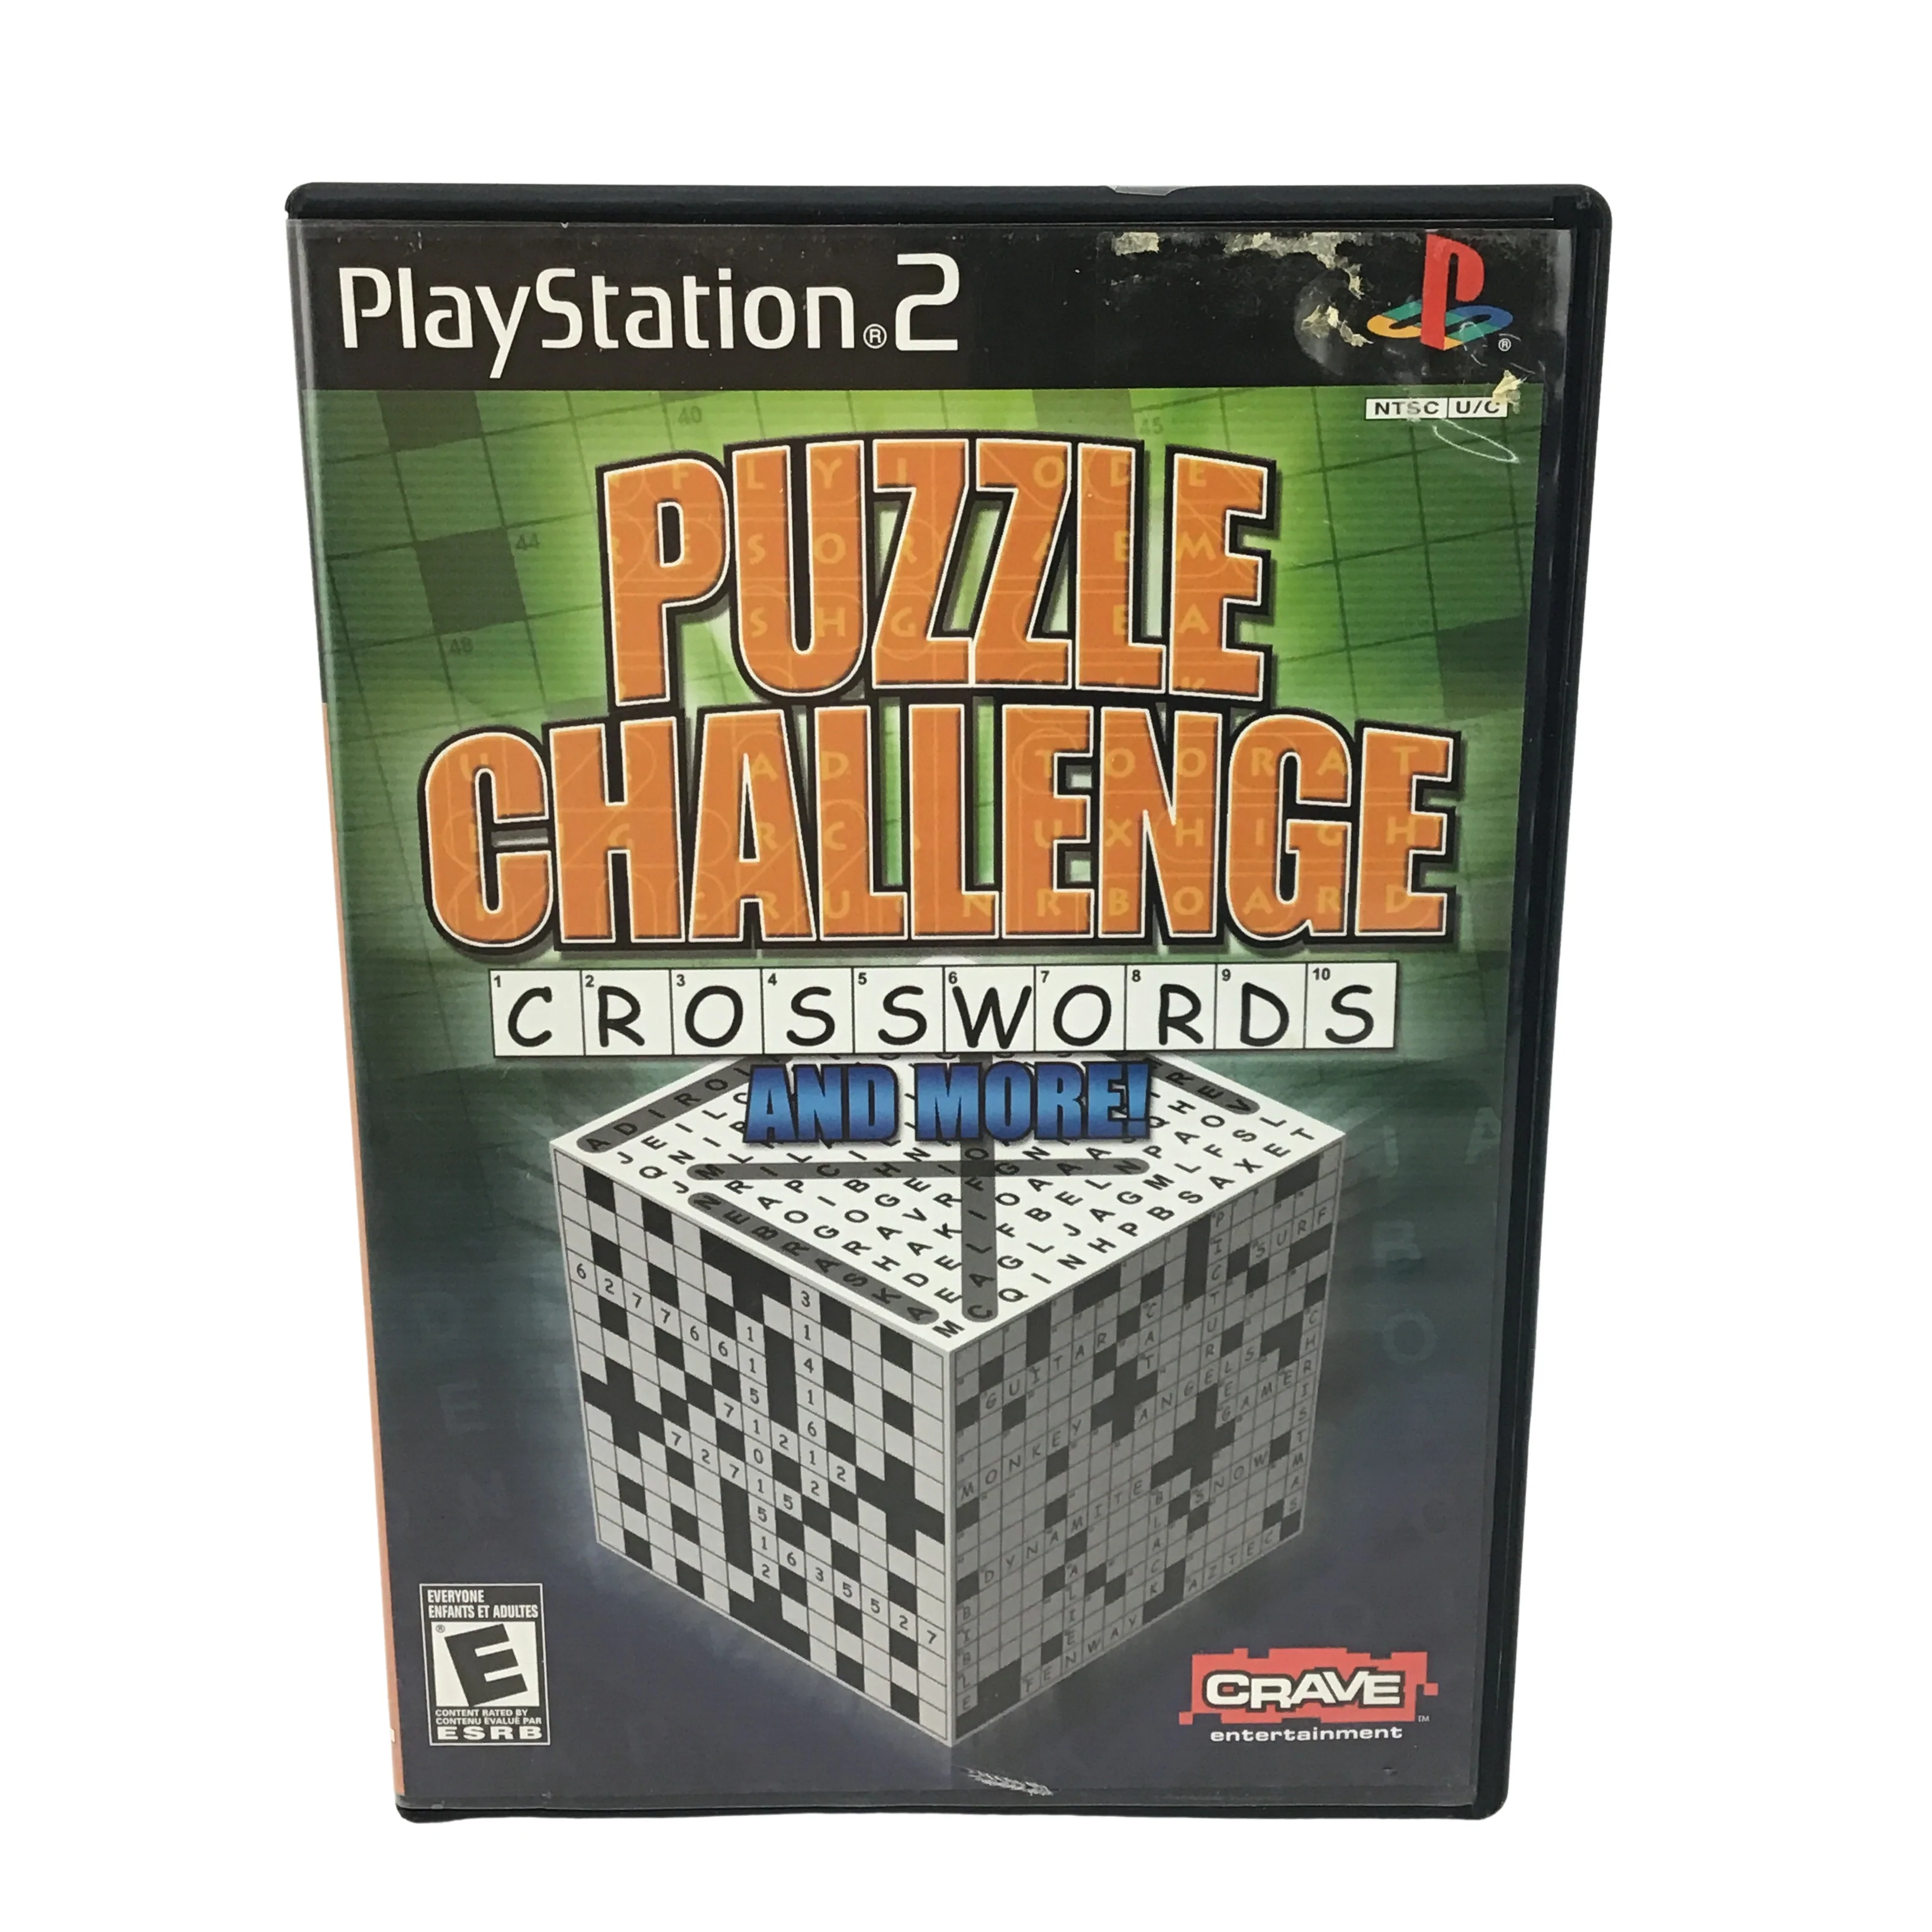 Play Station 2 : Puzzle Challenge Crosswords Game / Video Game **USED**